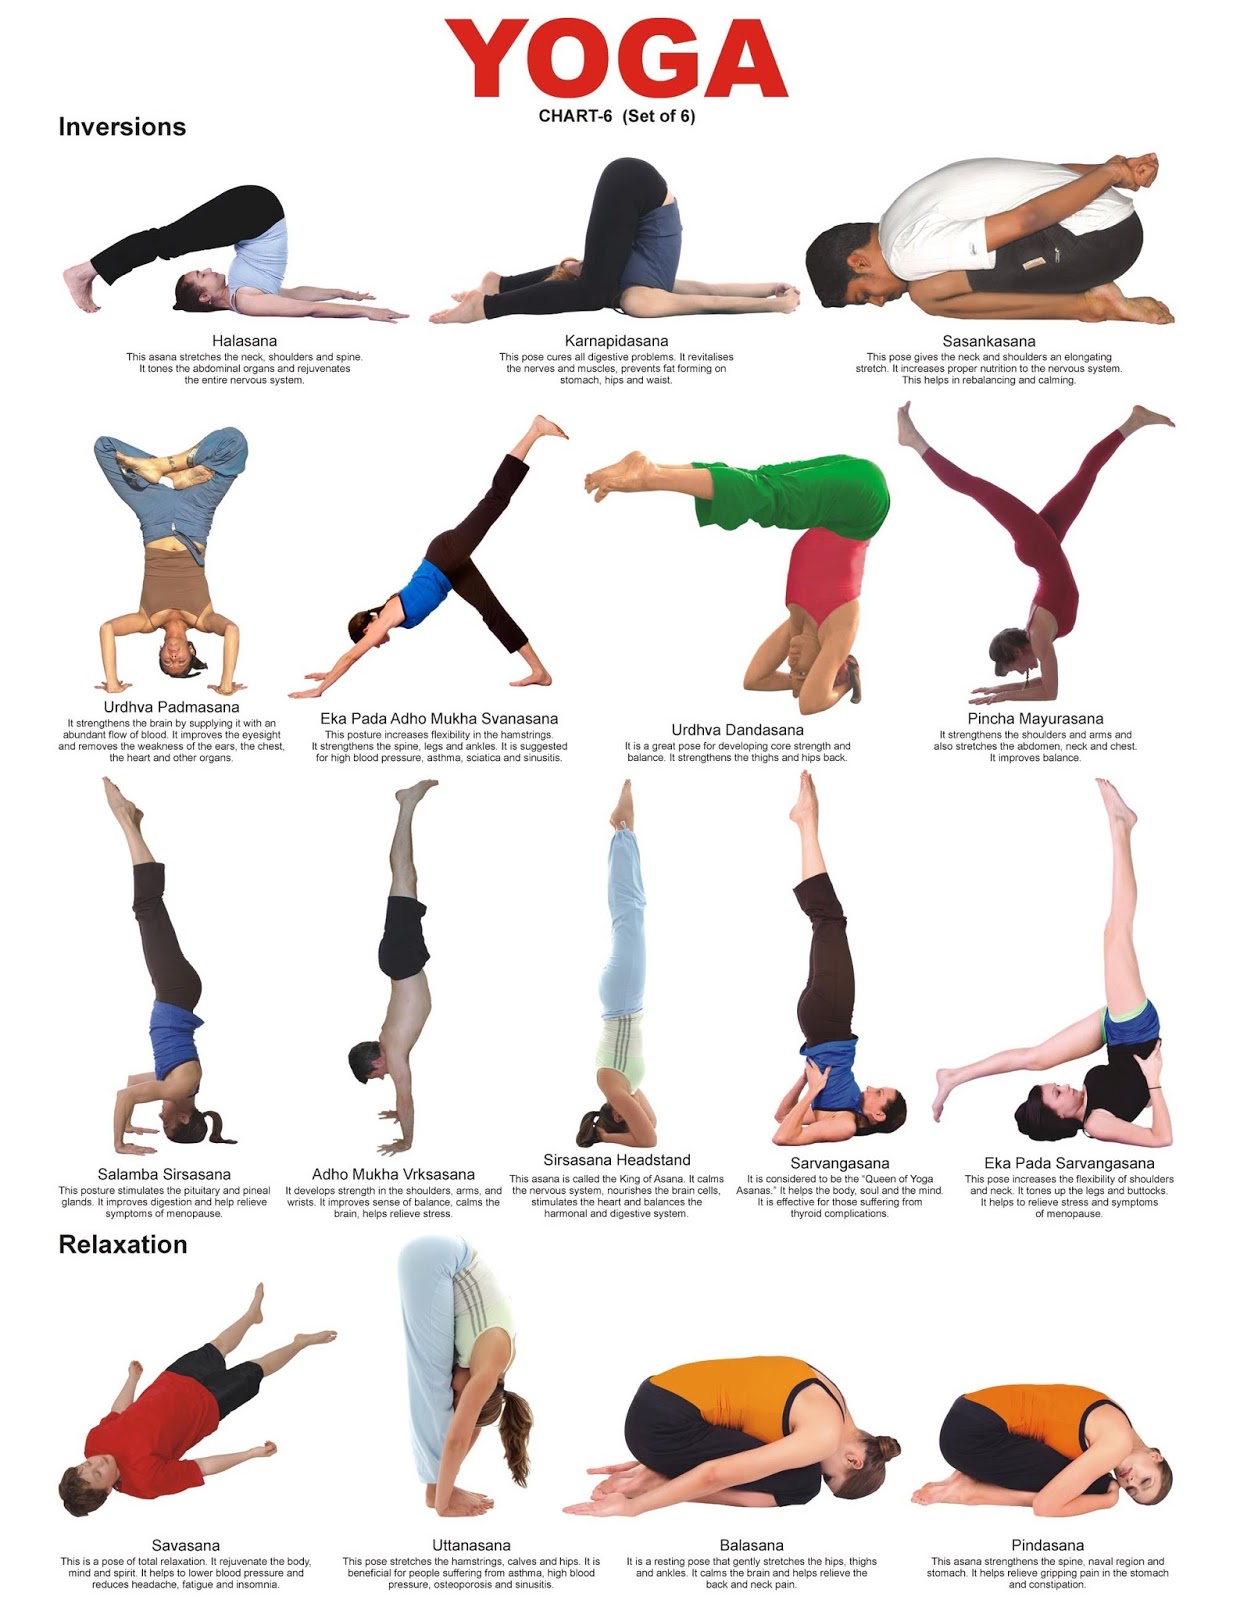 Raghu's column!: Countries across the world gear up to celebrate Yoga ...